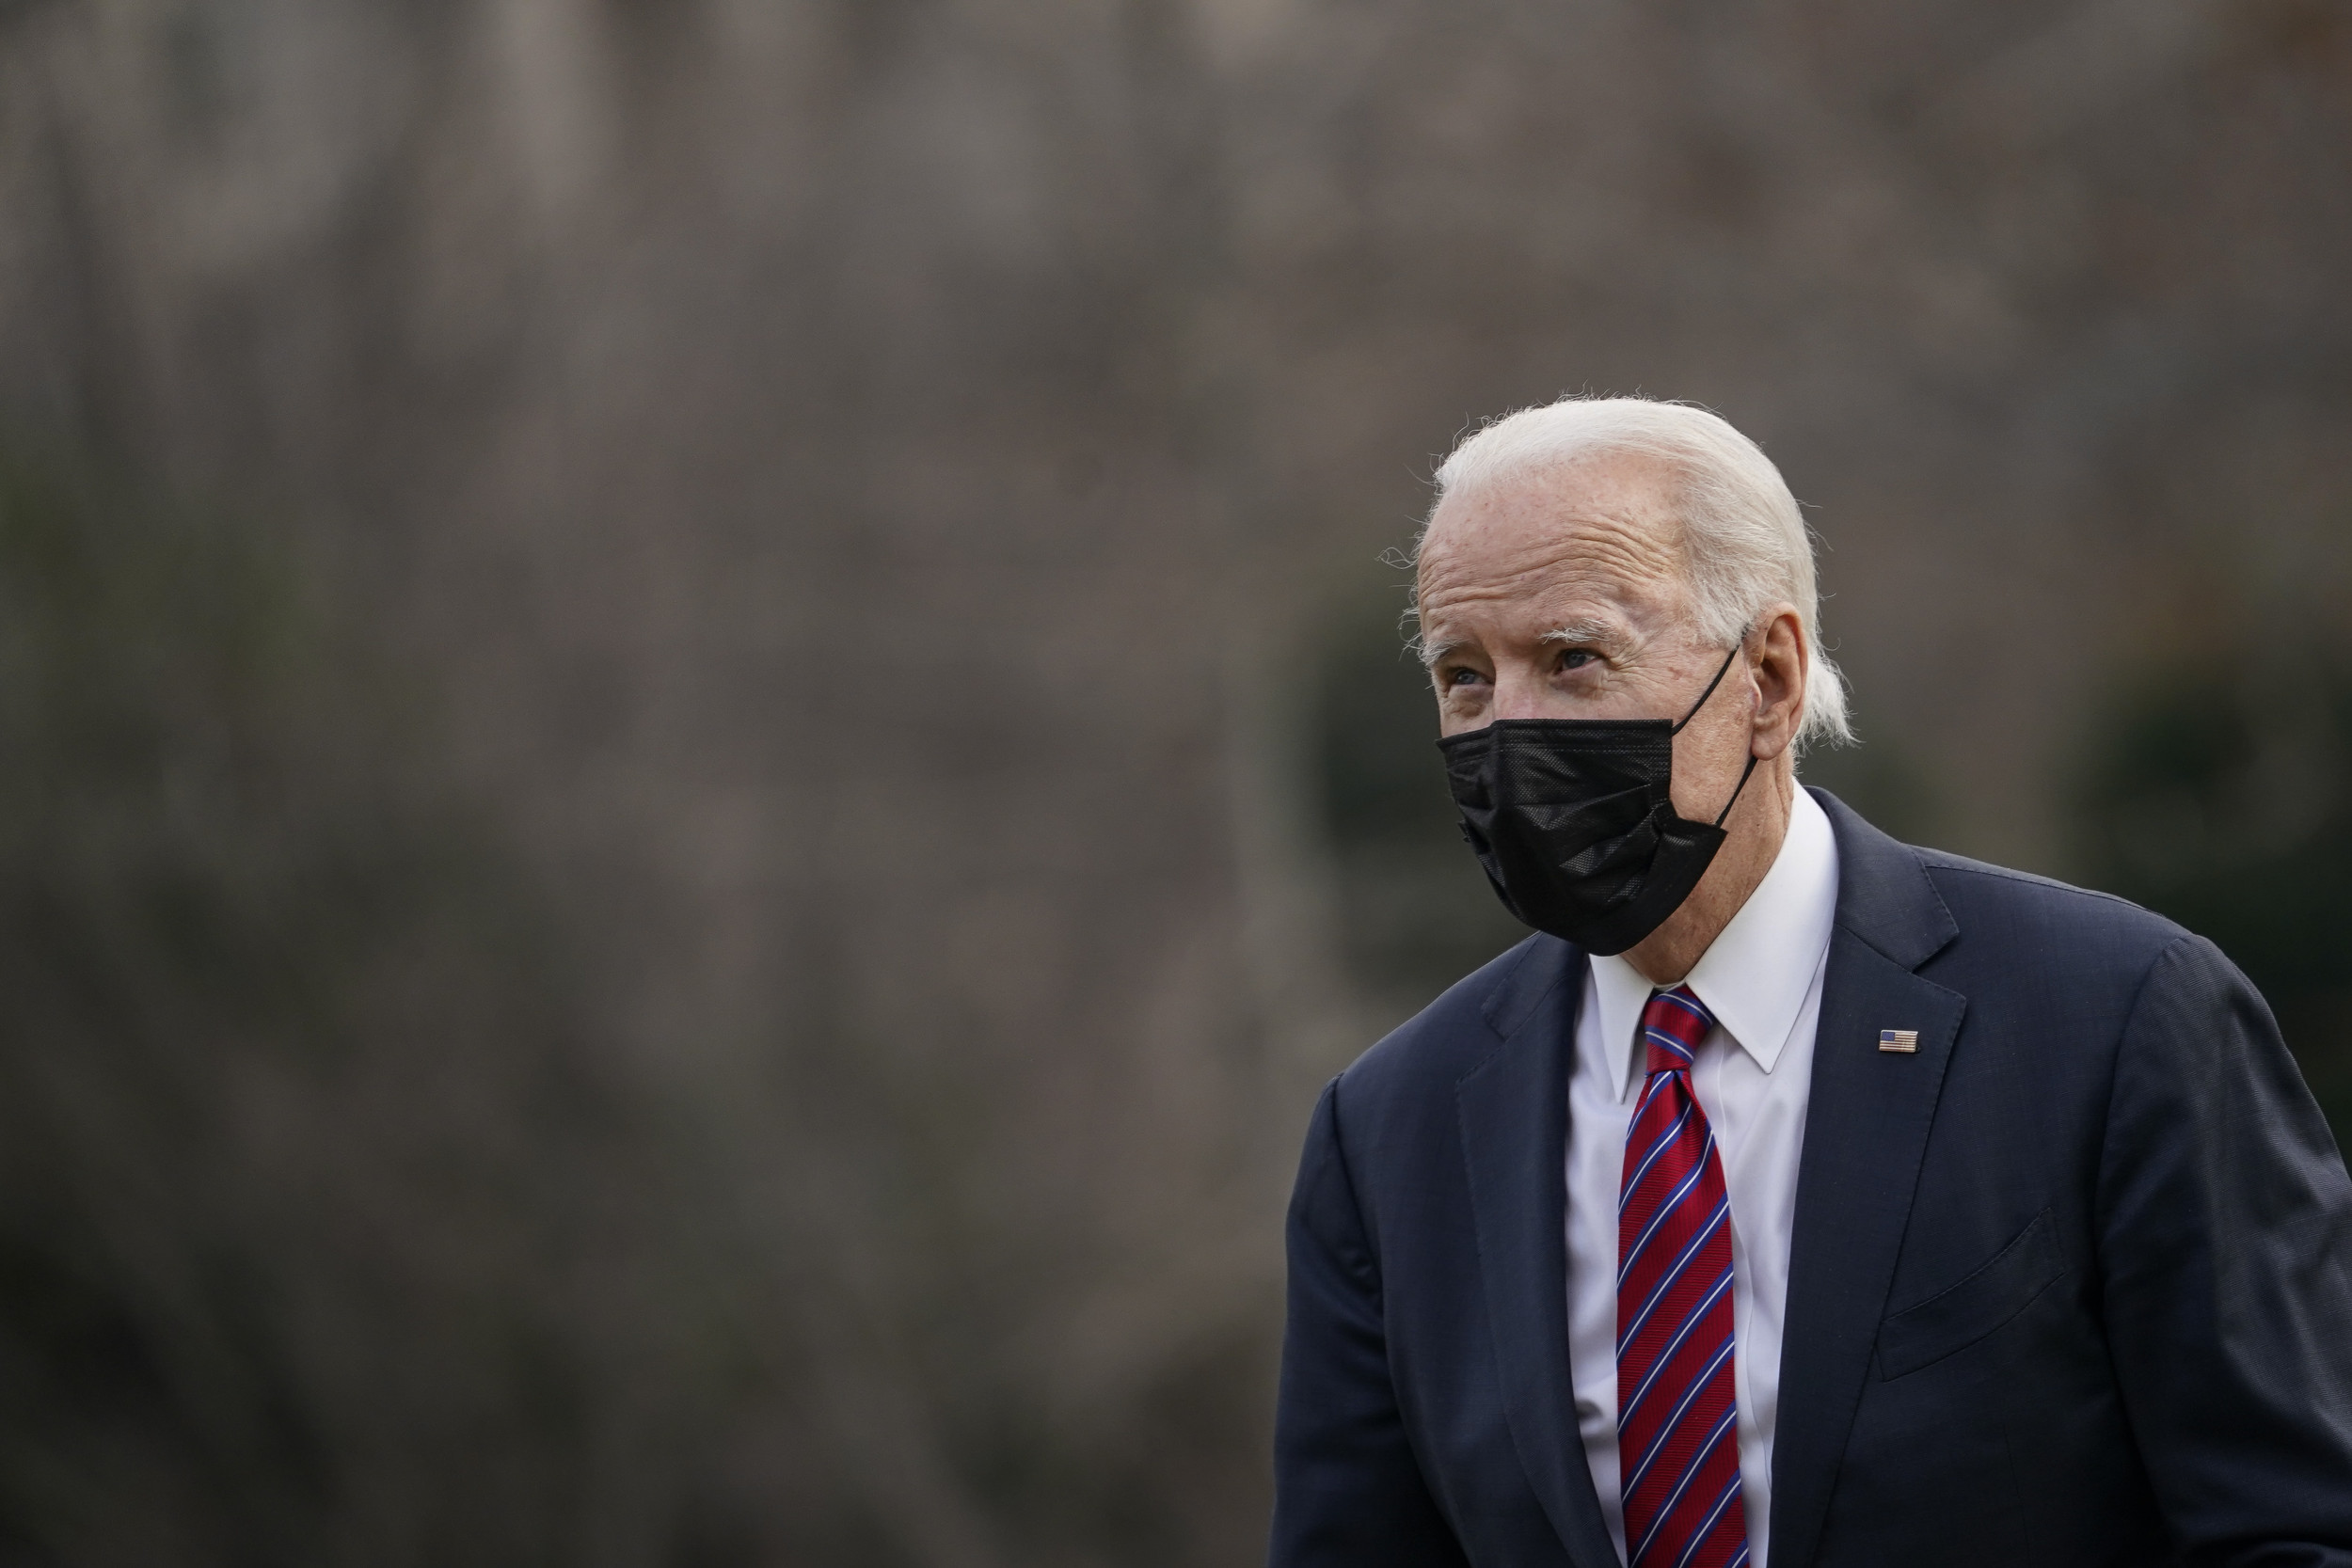 Joe Biden’s stimulus to financial vulnerability will provide the biggest boost to the economy: study